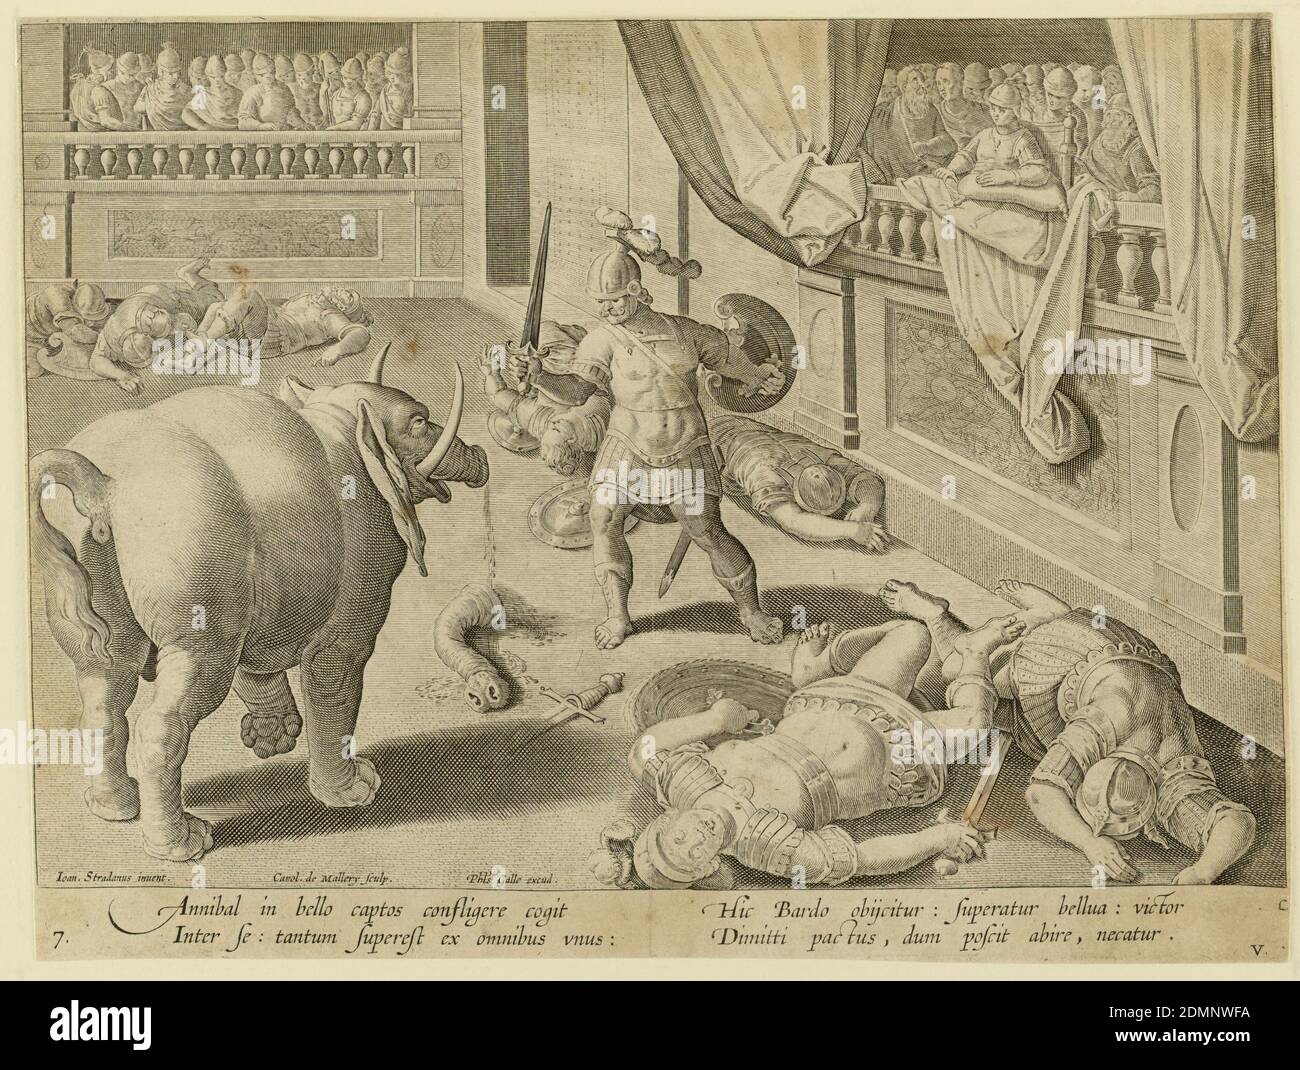 A Roman Soldier Fighting one of Hannibal's Elephants, pl. 7 in the Venationes Ferarum, Avium, Piscium series, Jan van der Straet, called Stradanus, Flemish, 1523–1605, Karel van Mallery, Philips Galle, Flemish, 1537 - 1612, Engraving on laid paper, Horizontal rectangle. Public combat between armeed warriors and an elephant. All of the warriors have fallen, except one, who faces the elephant, his sword upraised. A portion of the elephant's trunk has been severed. Spectators in enclosures, right and rear. Left to center, below: 'Ioan. Stradanus invent. / Carol de Mallery Sculp. / Phls Galle Stock Photo